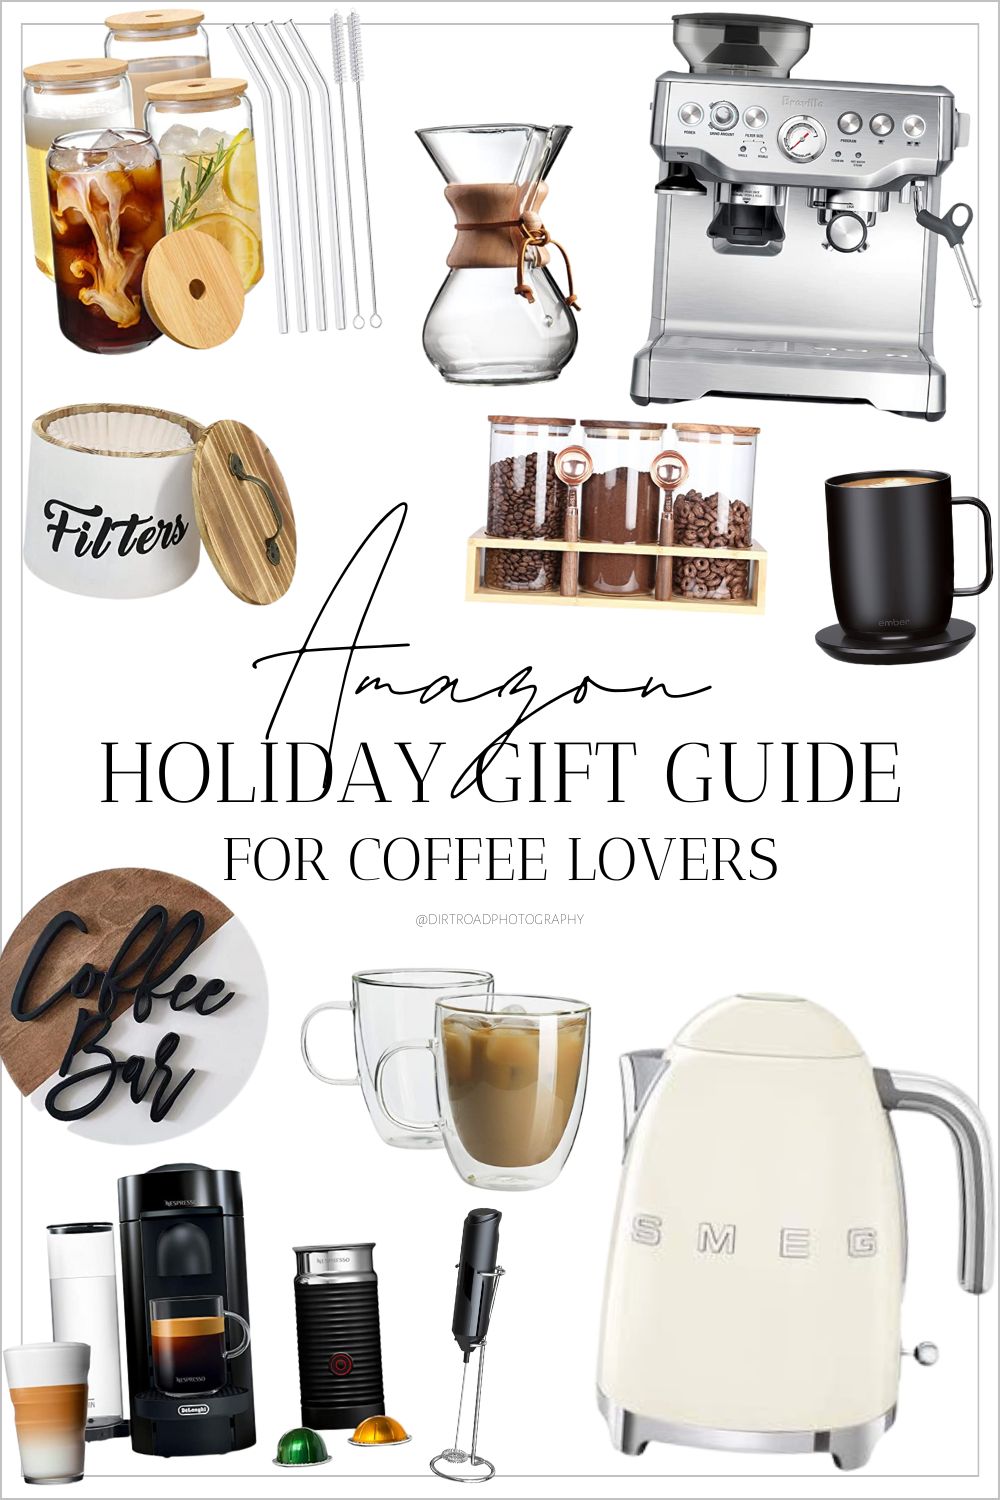 Top Amazon Christmas gifts for coffee lovers and those who drink coffee. Links for our favorite coffee gifts for Christmas 2022. We've built a huge list of our top gifts from Amazon for your family for the holiday season.